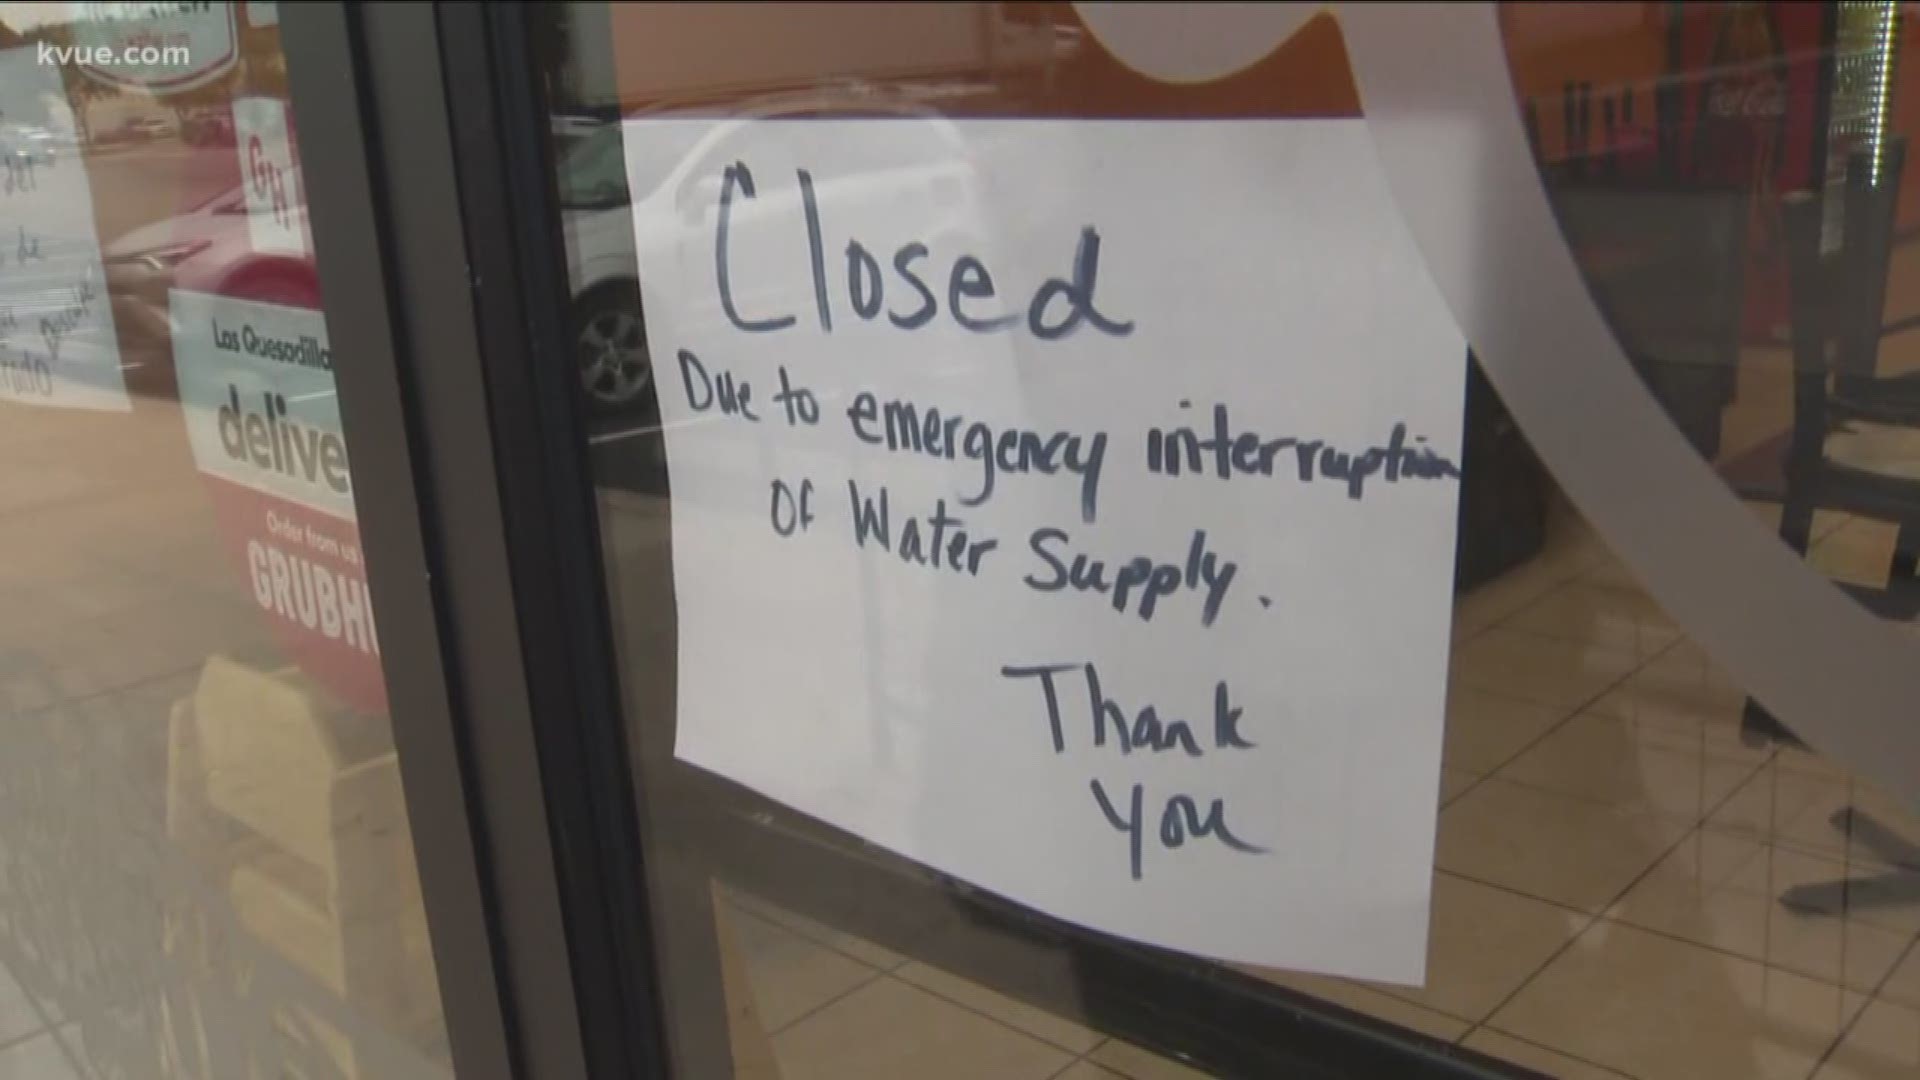 The City of Austin issued a city-wide boil water notice early Monday morning following historic flooding that brought in high levels of silt into the city's water supply, making it challenging for the water plants to produce the volume of water needed to